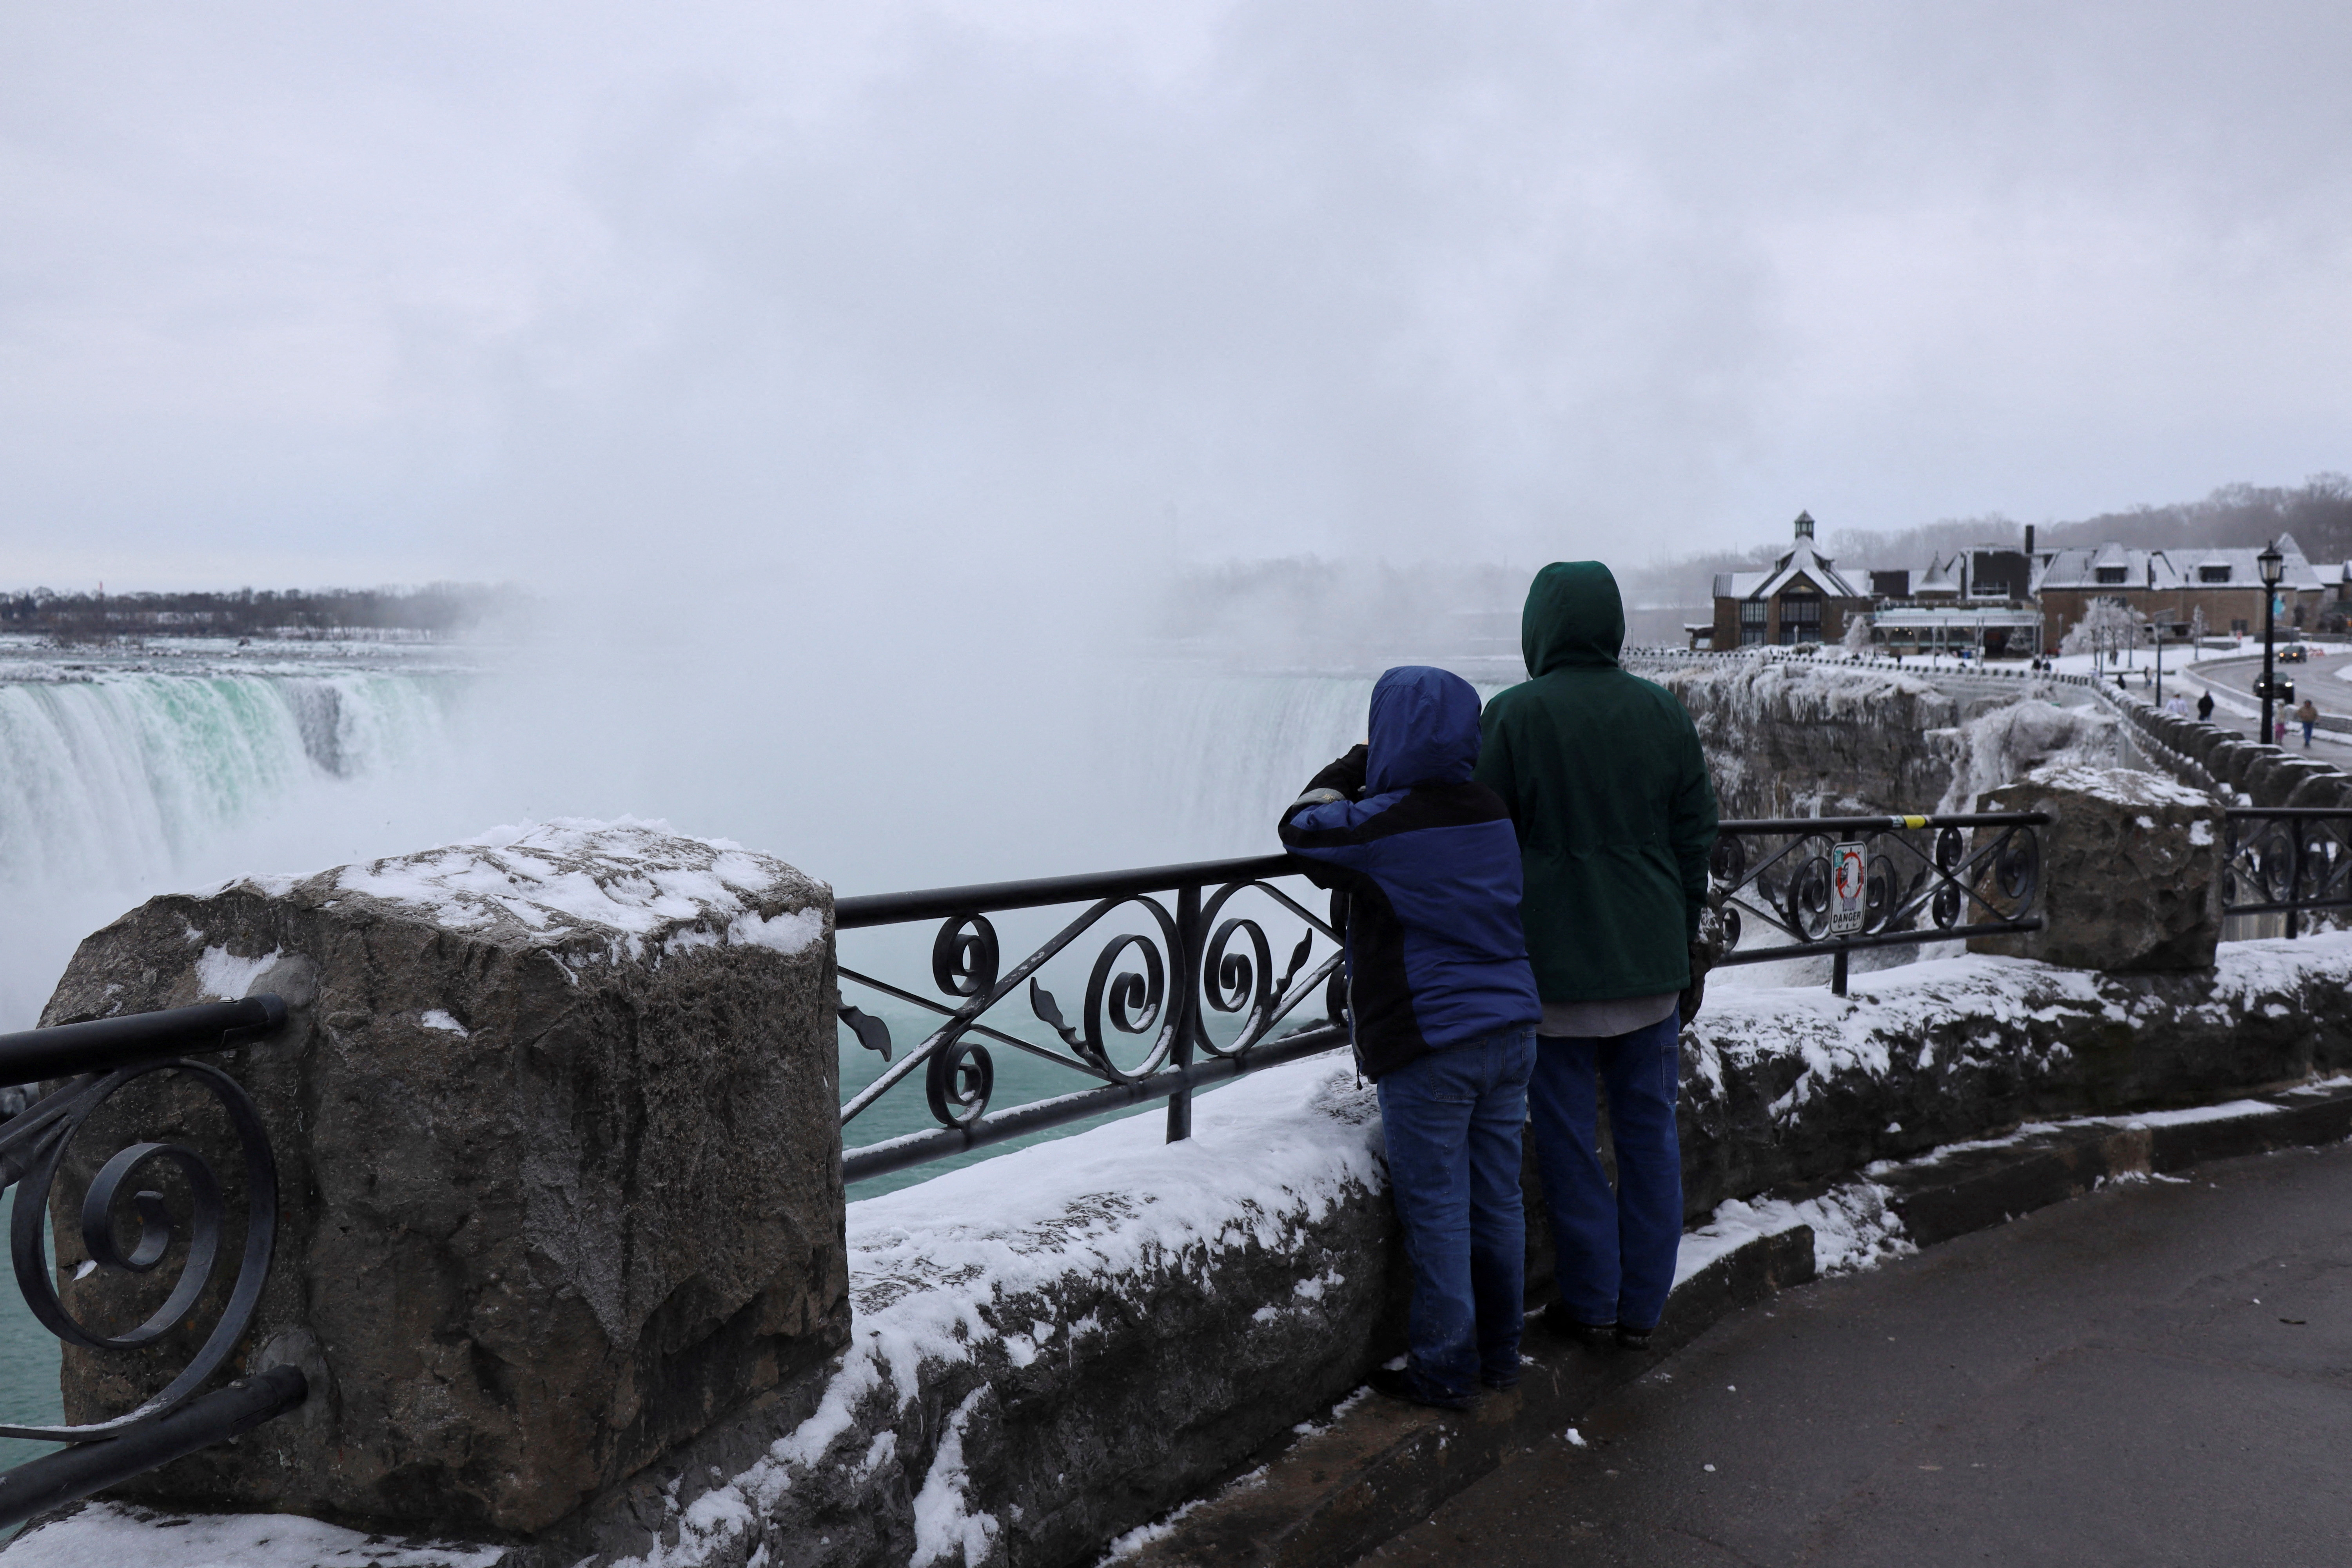 Tourists view mist rising from the Horseshoe Falls while visiting Niagara Falls, Ontario